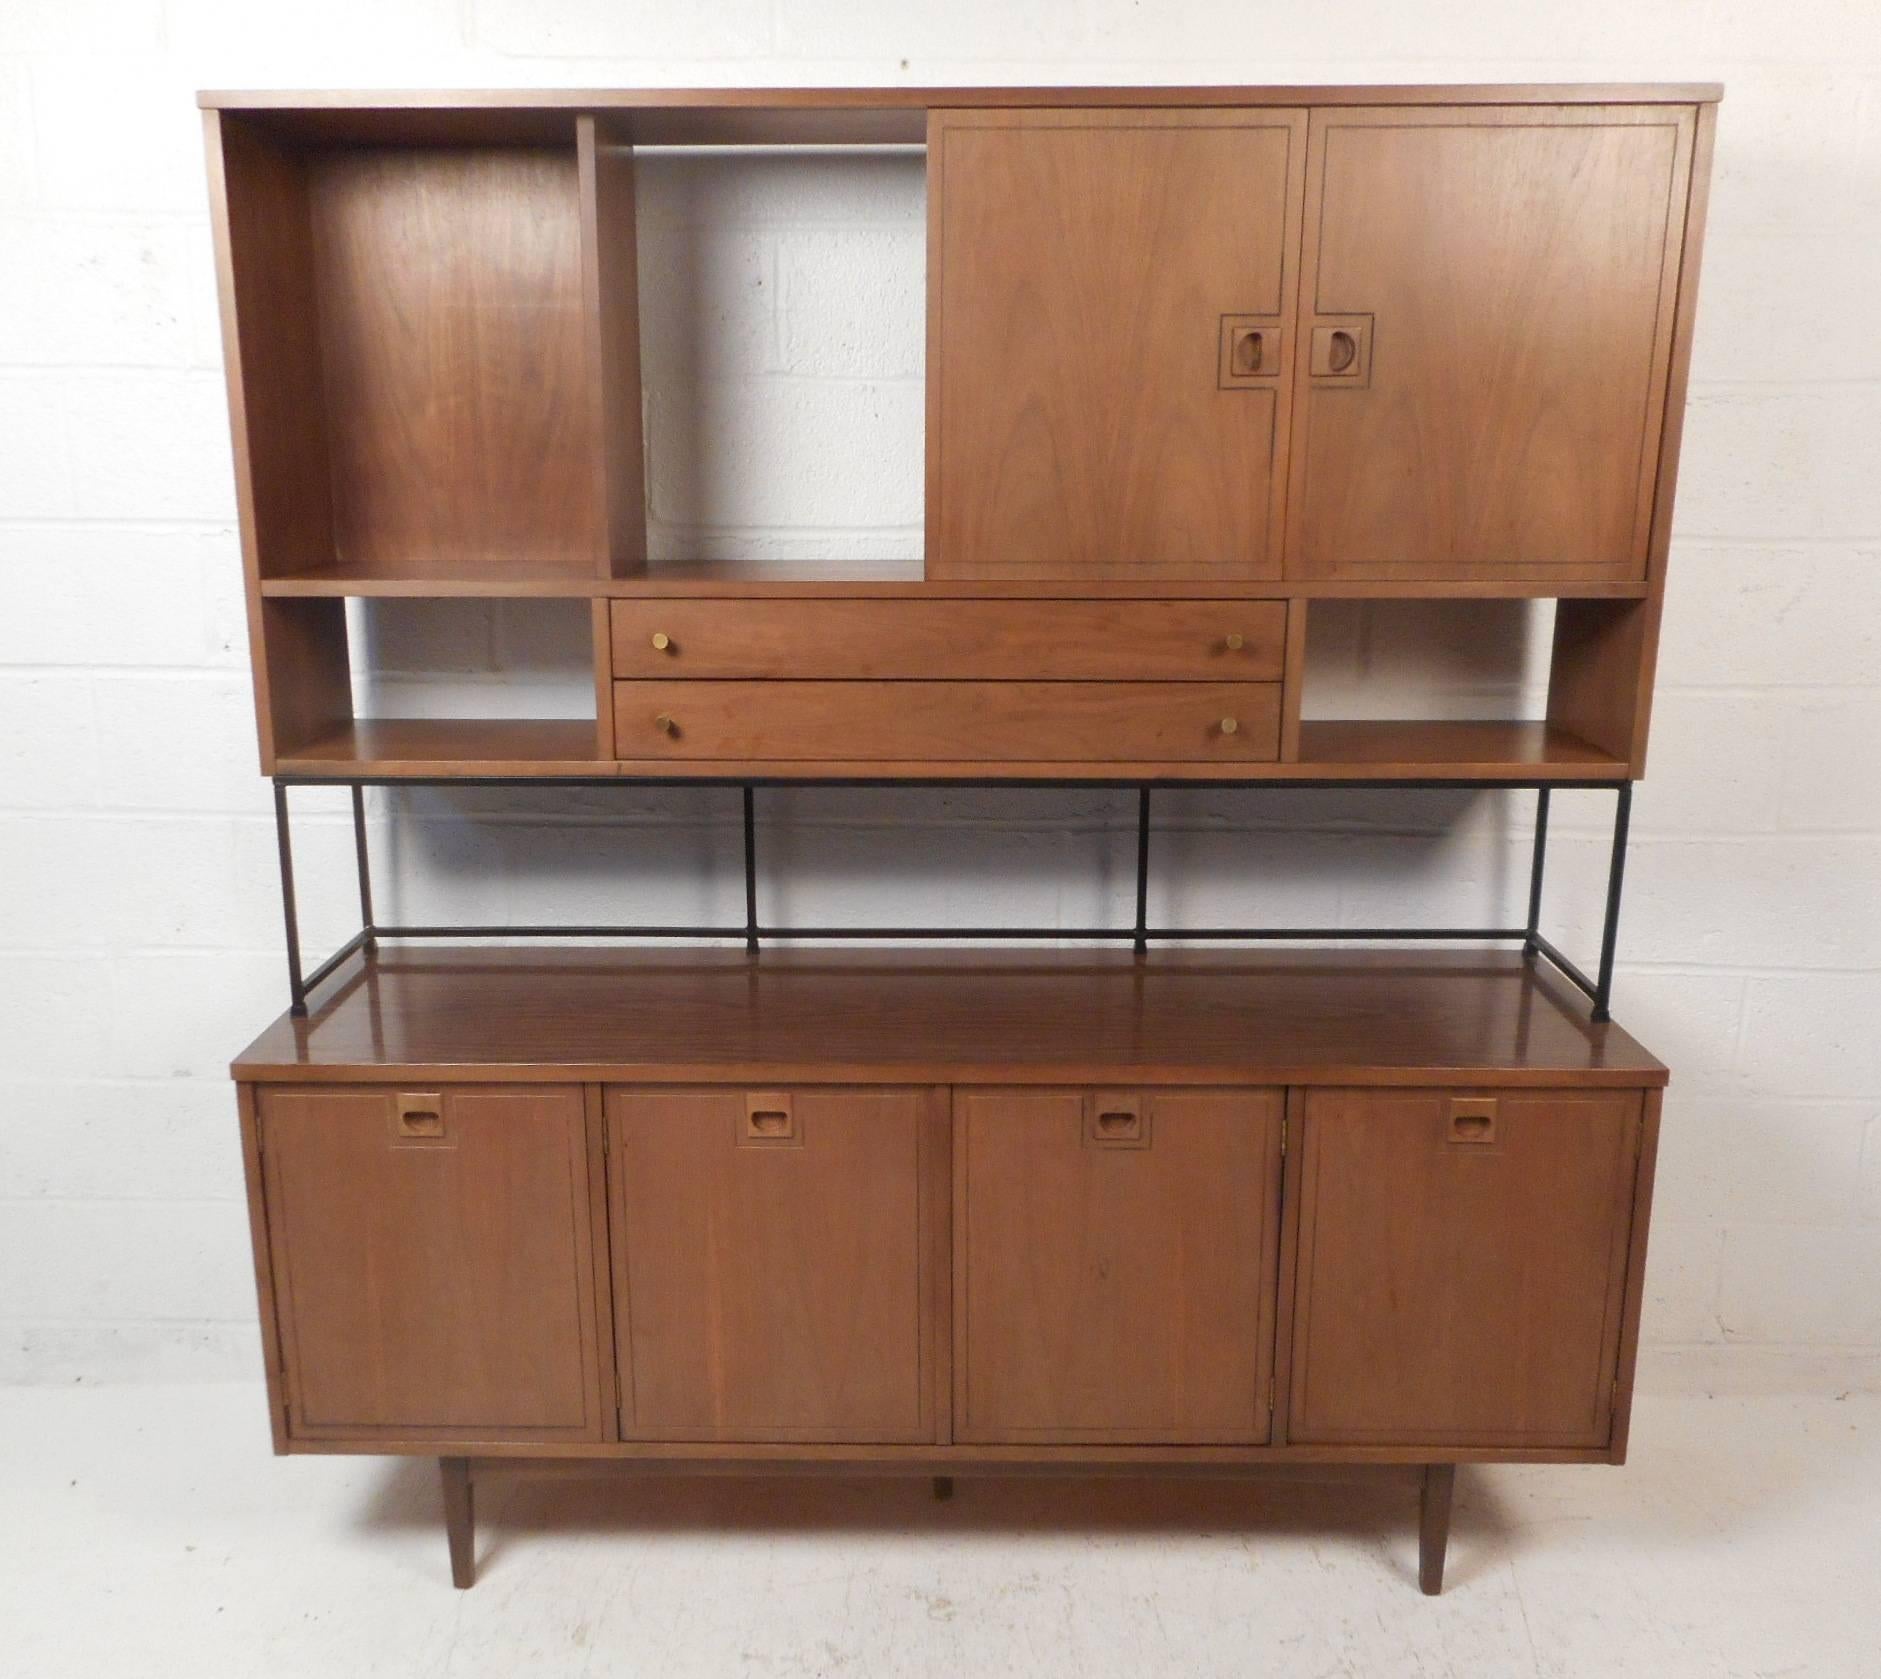 A stunning mid-century modern hutch by Stanley Furniture that consist of two separate pieces. This wonderful case piece offers ample room for storage within its many compartments and drawers. A topper with sliding doors, two drawers, and an iron